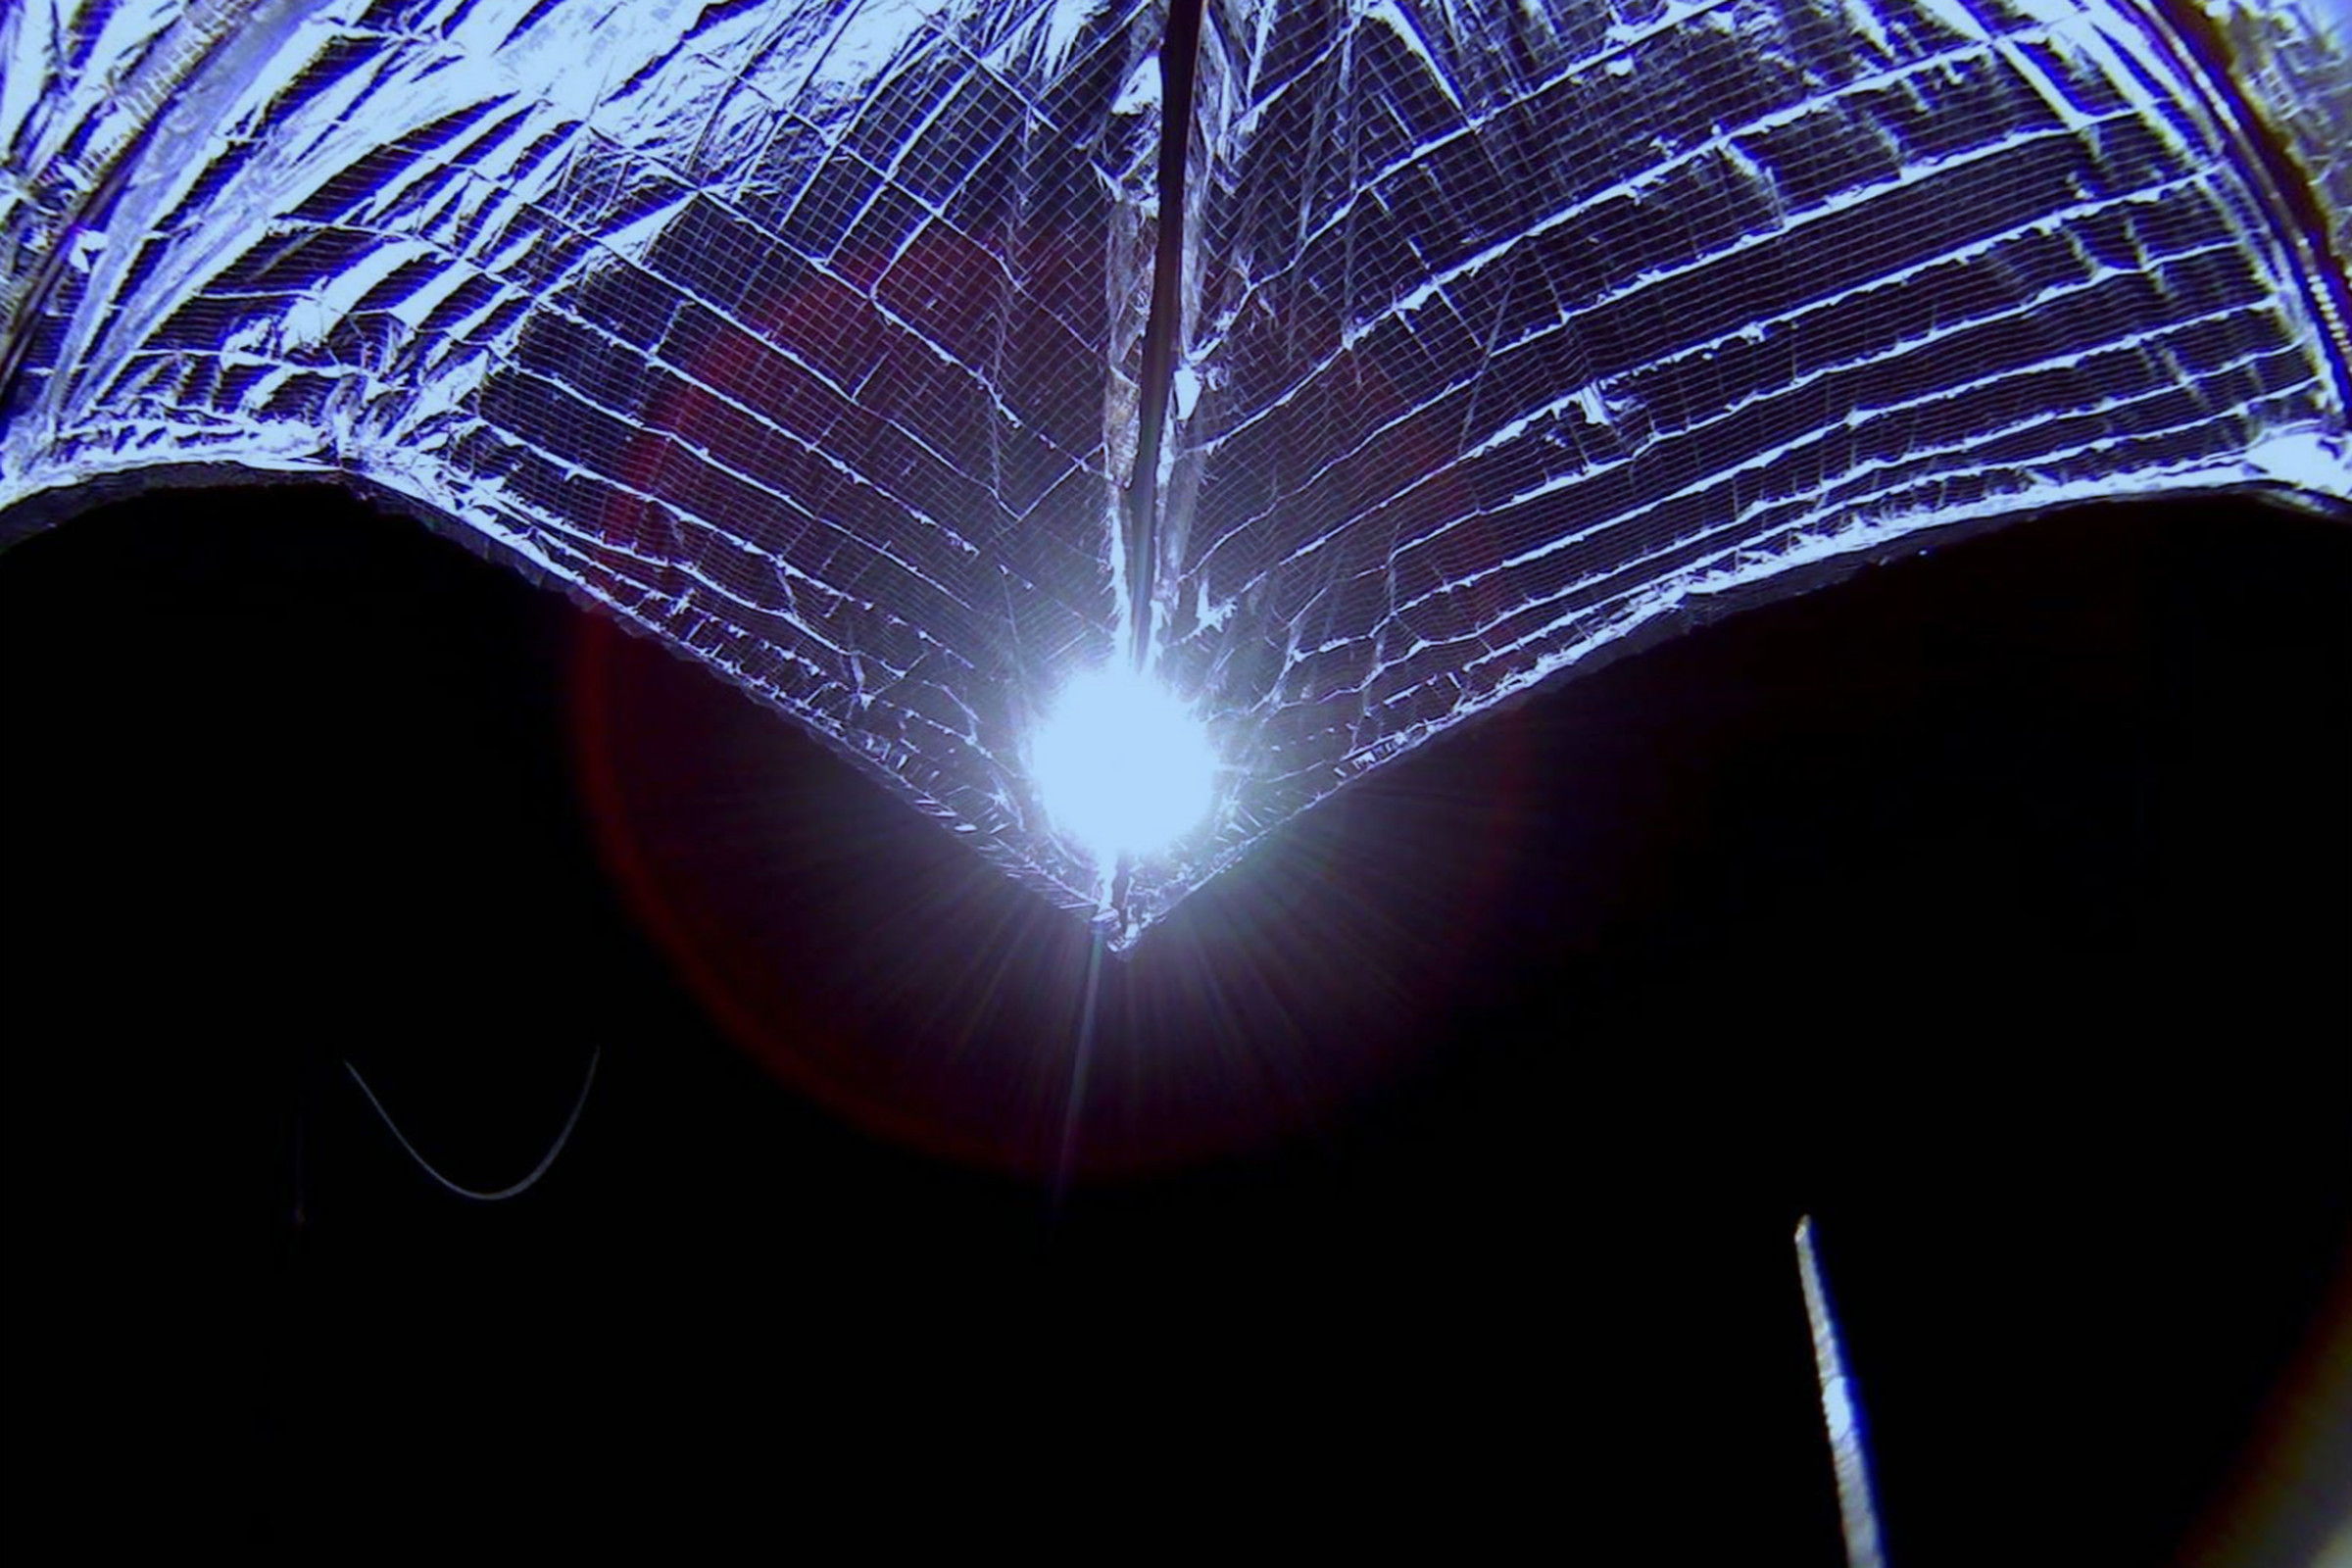 LightSail 2’s solar sail, as seen from the spacecraft’s onboard camera